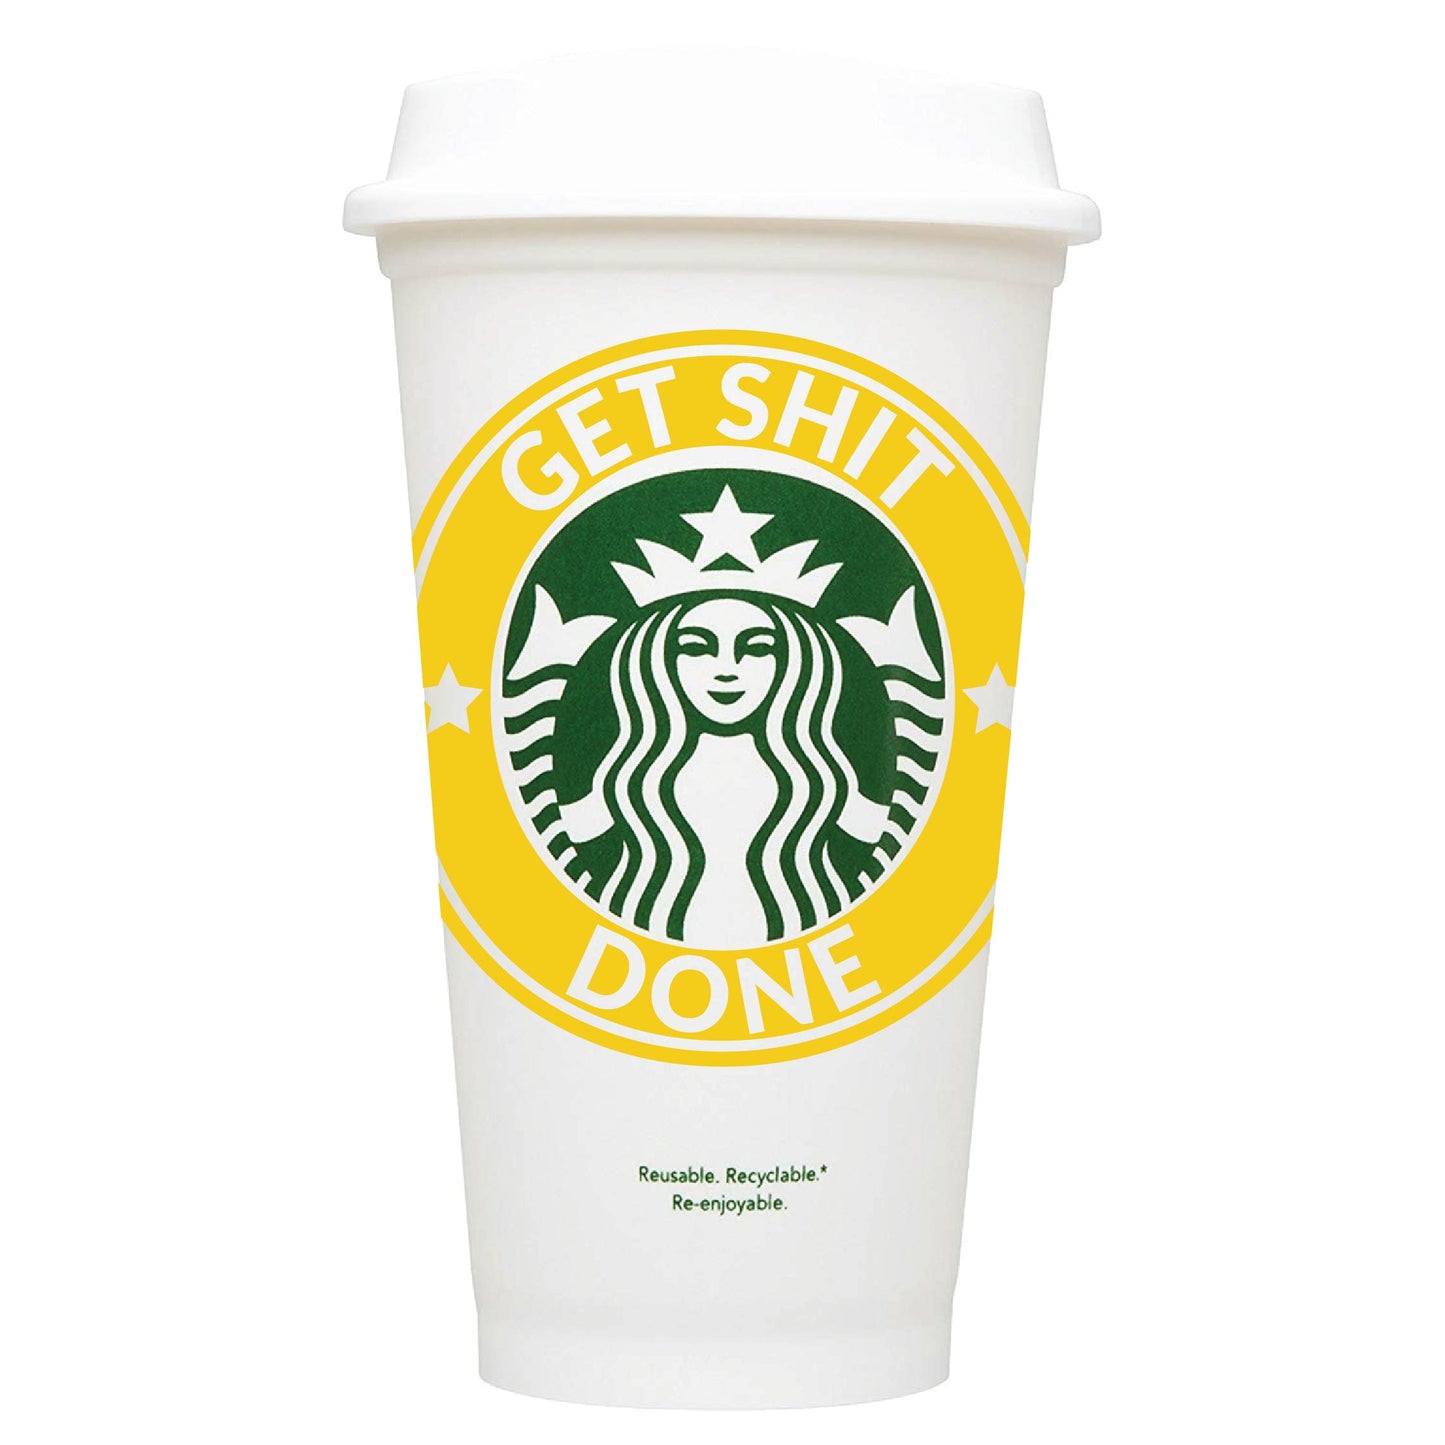 Get Shit Done Starbucks Hot Cup